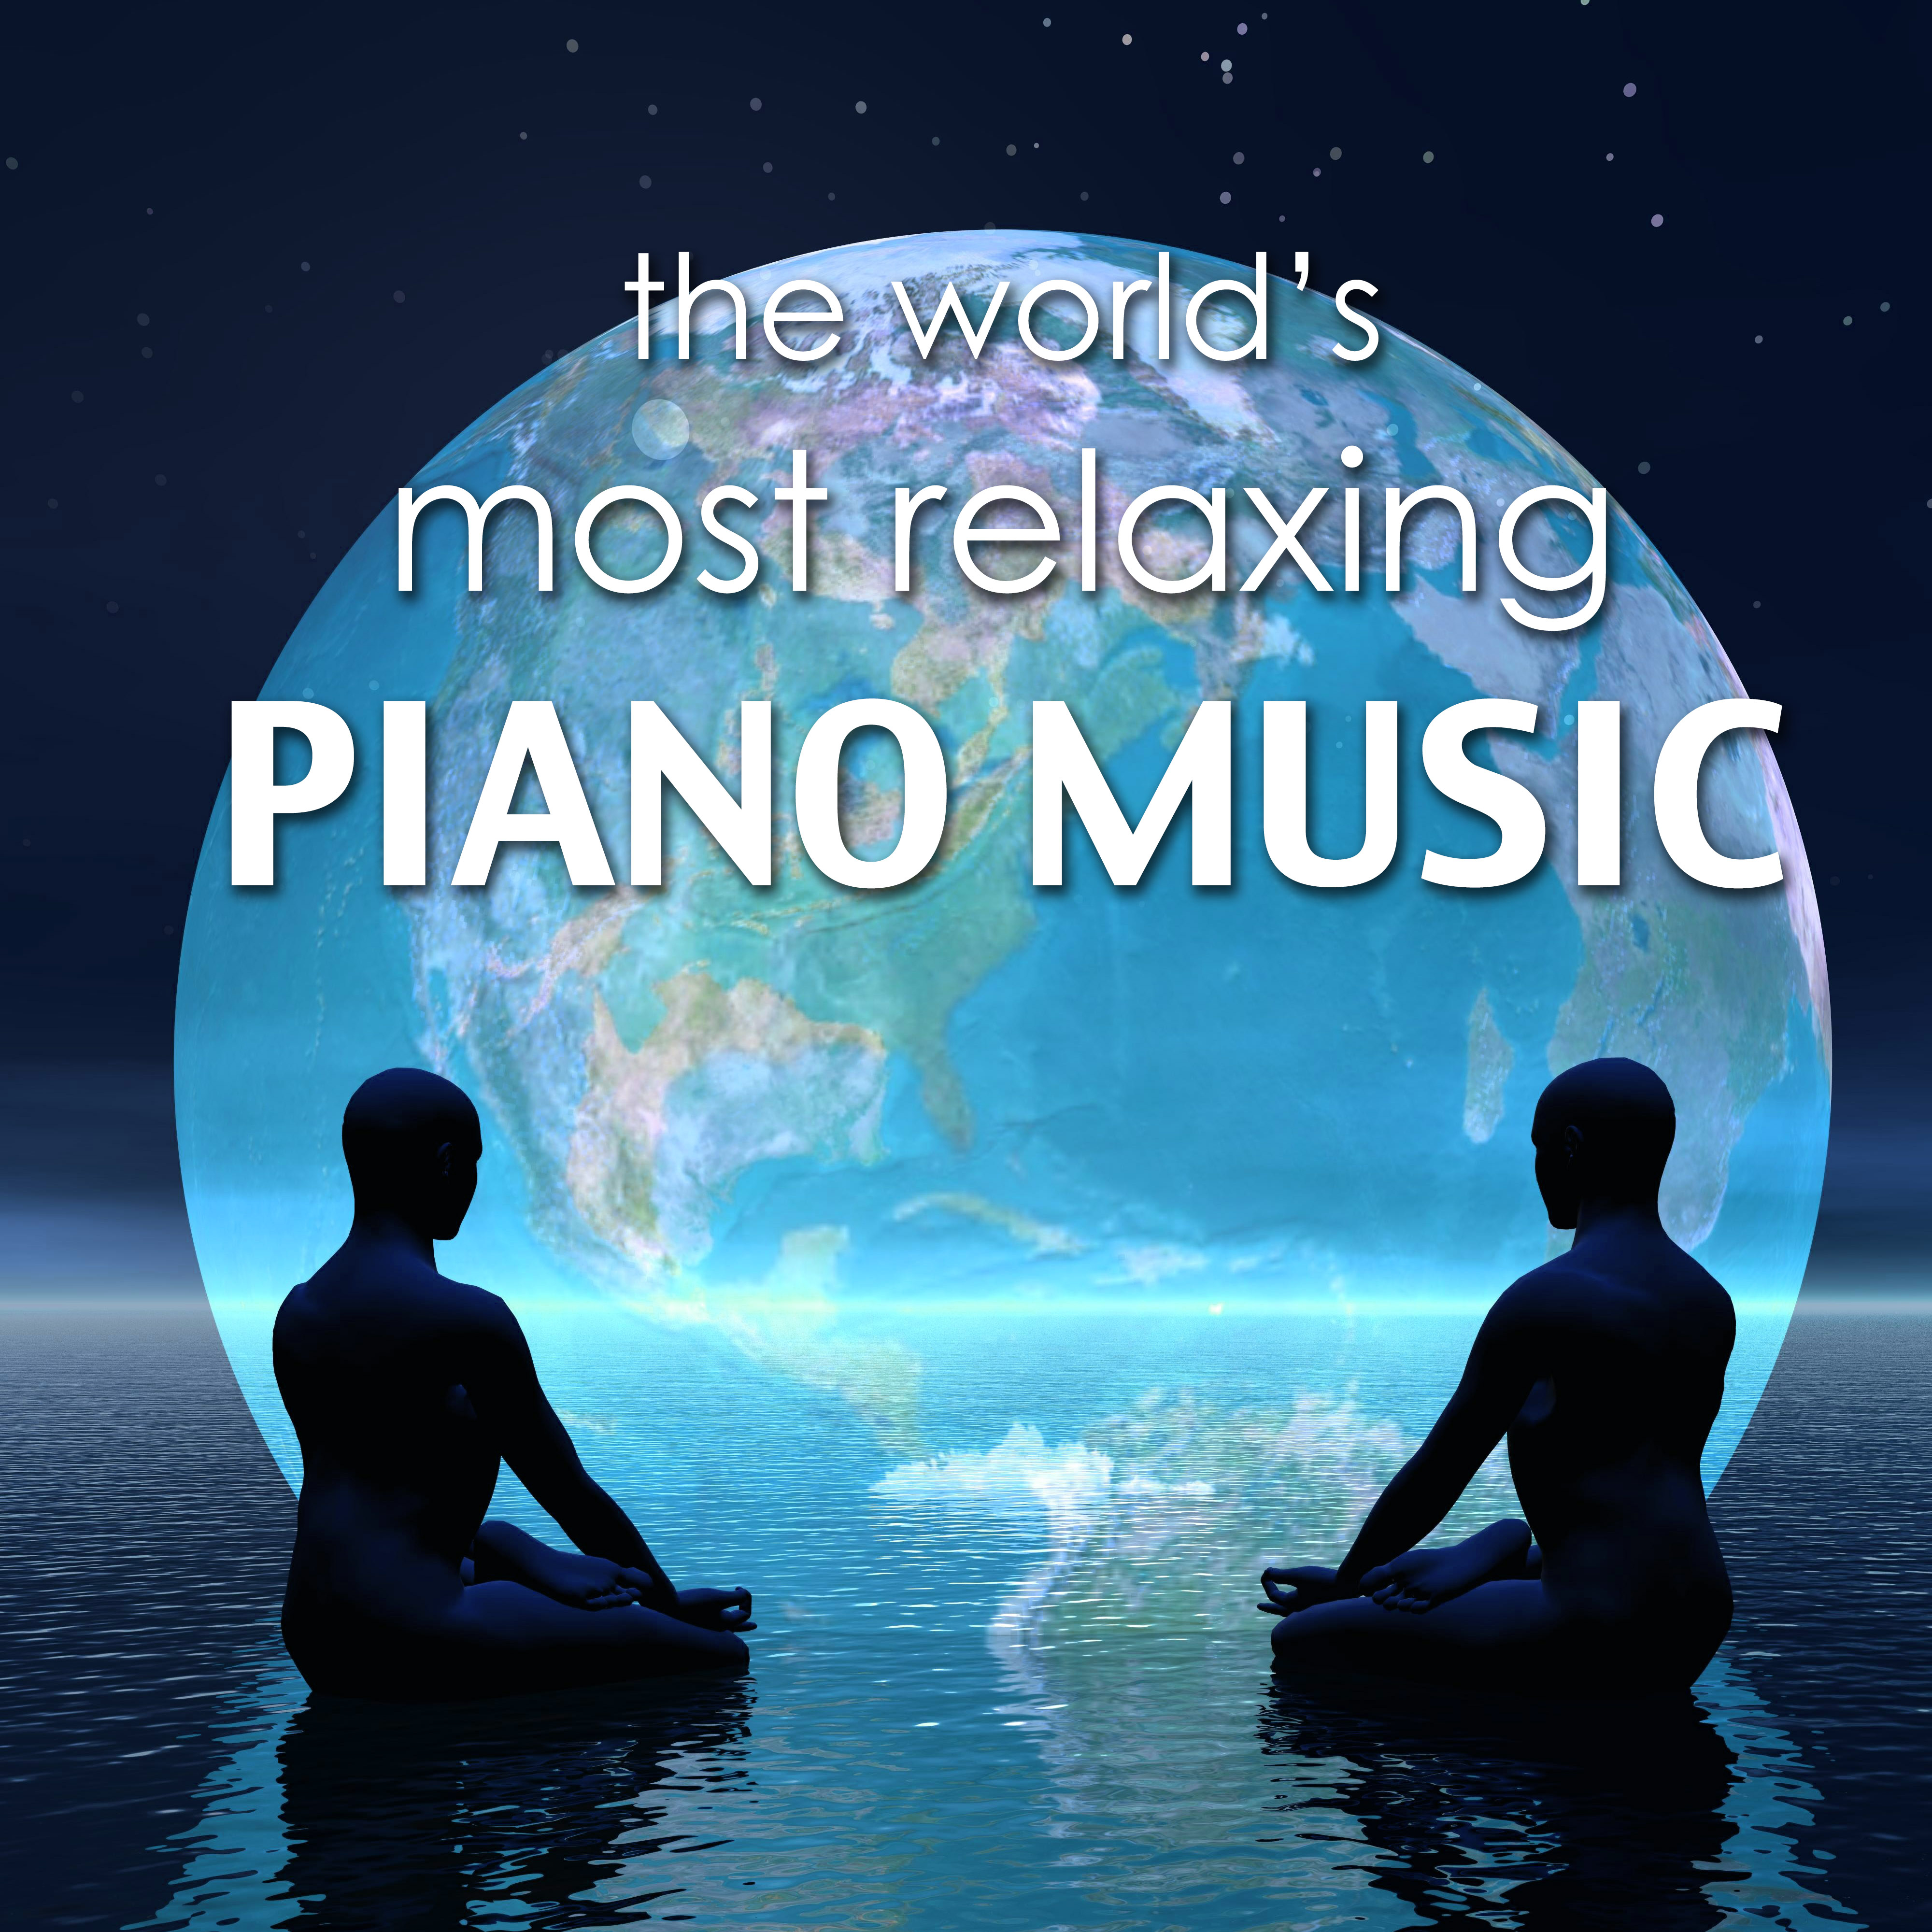 The World's Most Relaxing Piano Music - Relaxing Instrumental Meditation Songs and Relaxation with Romantic Spa Massage Music